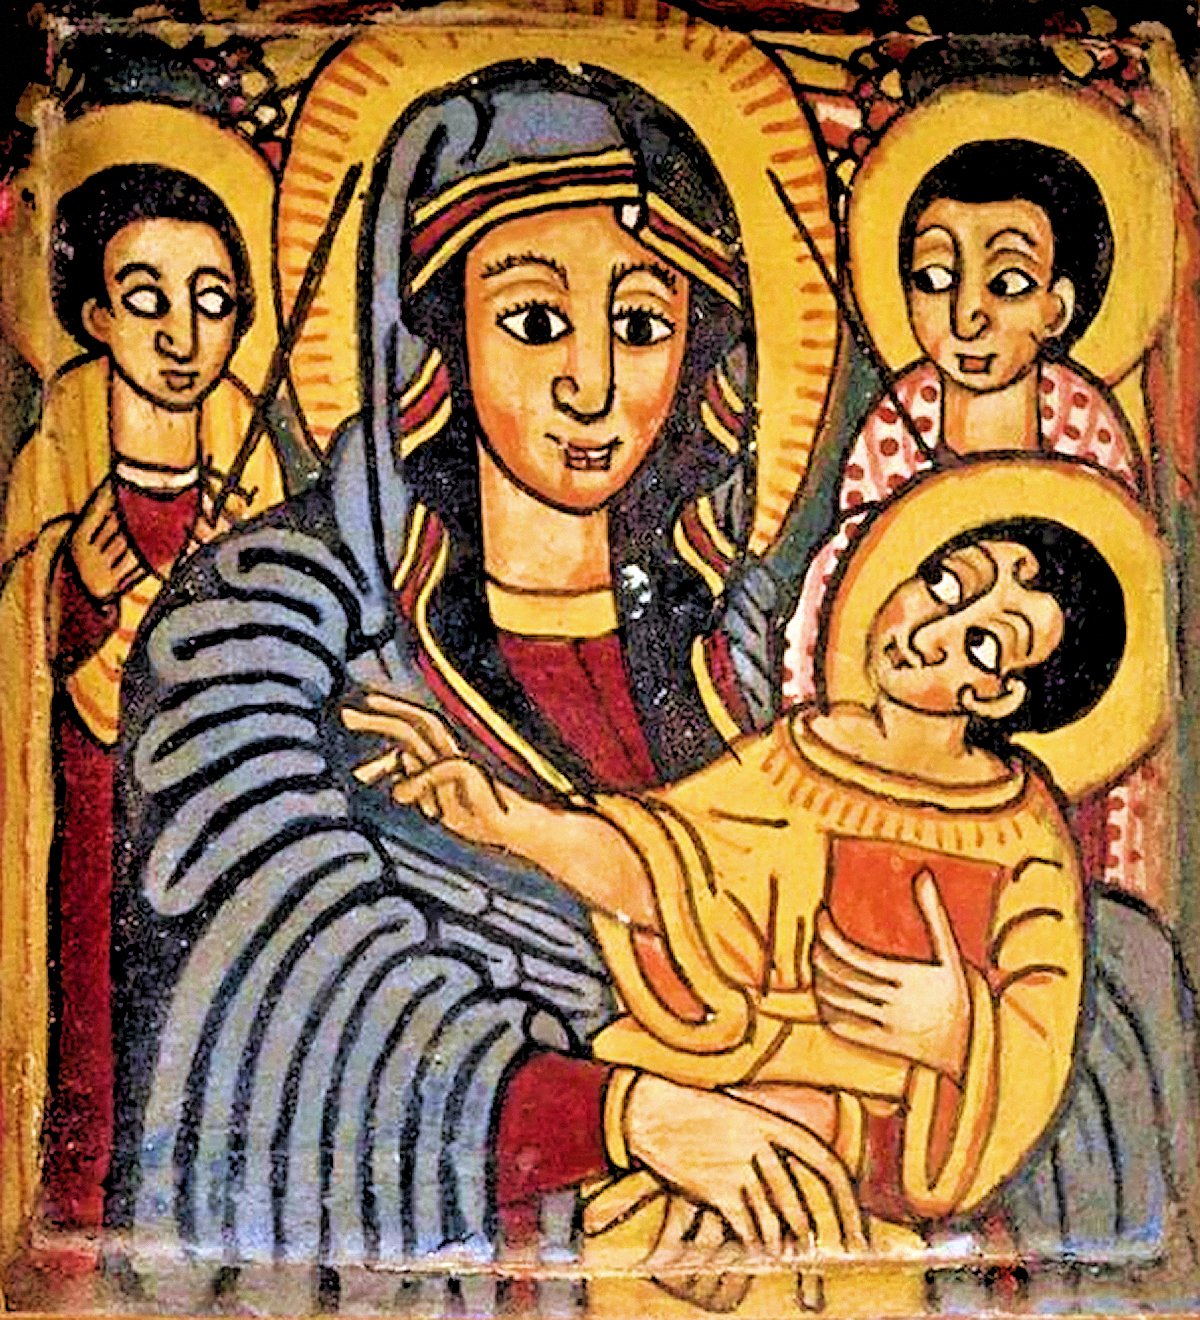 00-ethiopian-icon-of-the-birthgiver-mary-260615.jpg